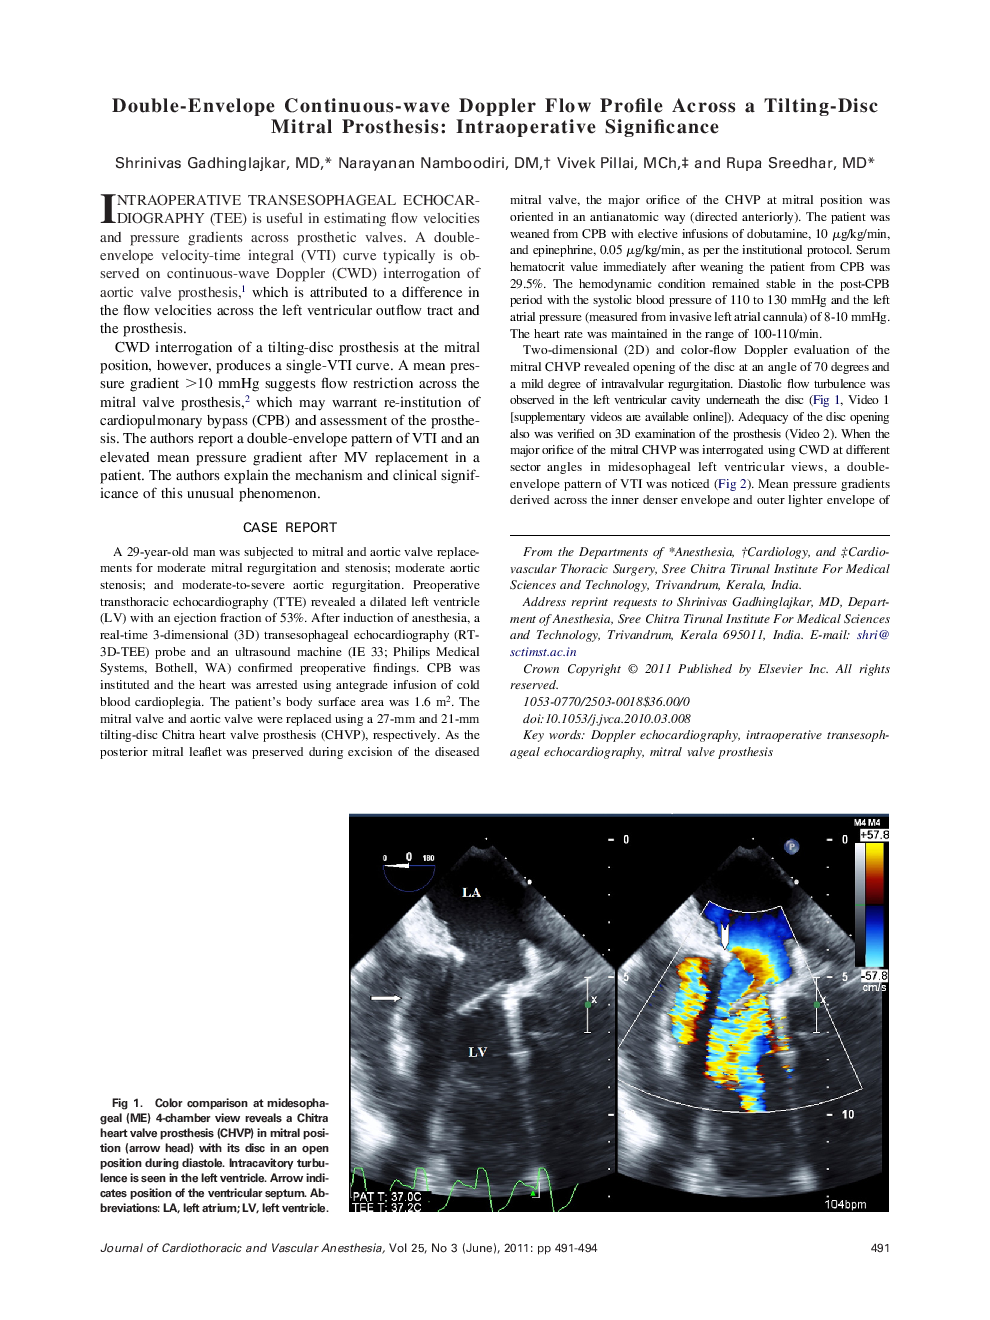 Double-Envelope Continuous-wave Doppler Flow Profile Across a Tilting-Disc Mitral Prosthesis: Intraoperative Significance